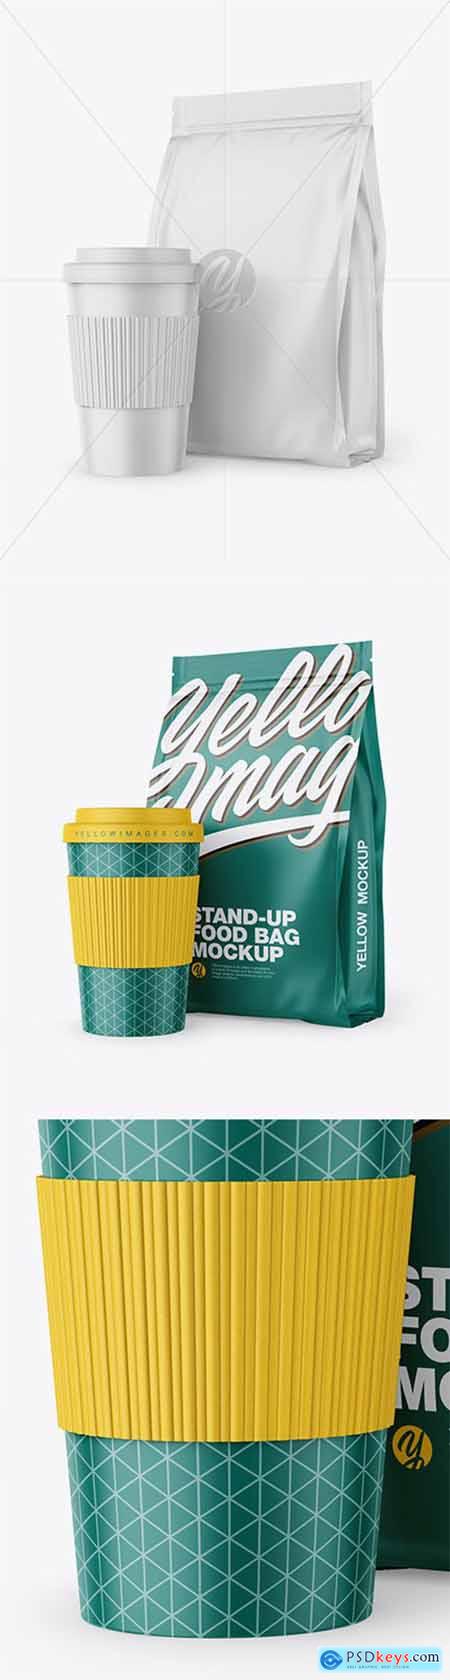 Matte Stand-Up Bag with Coffee Cup Mockup 64586